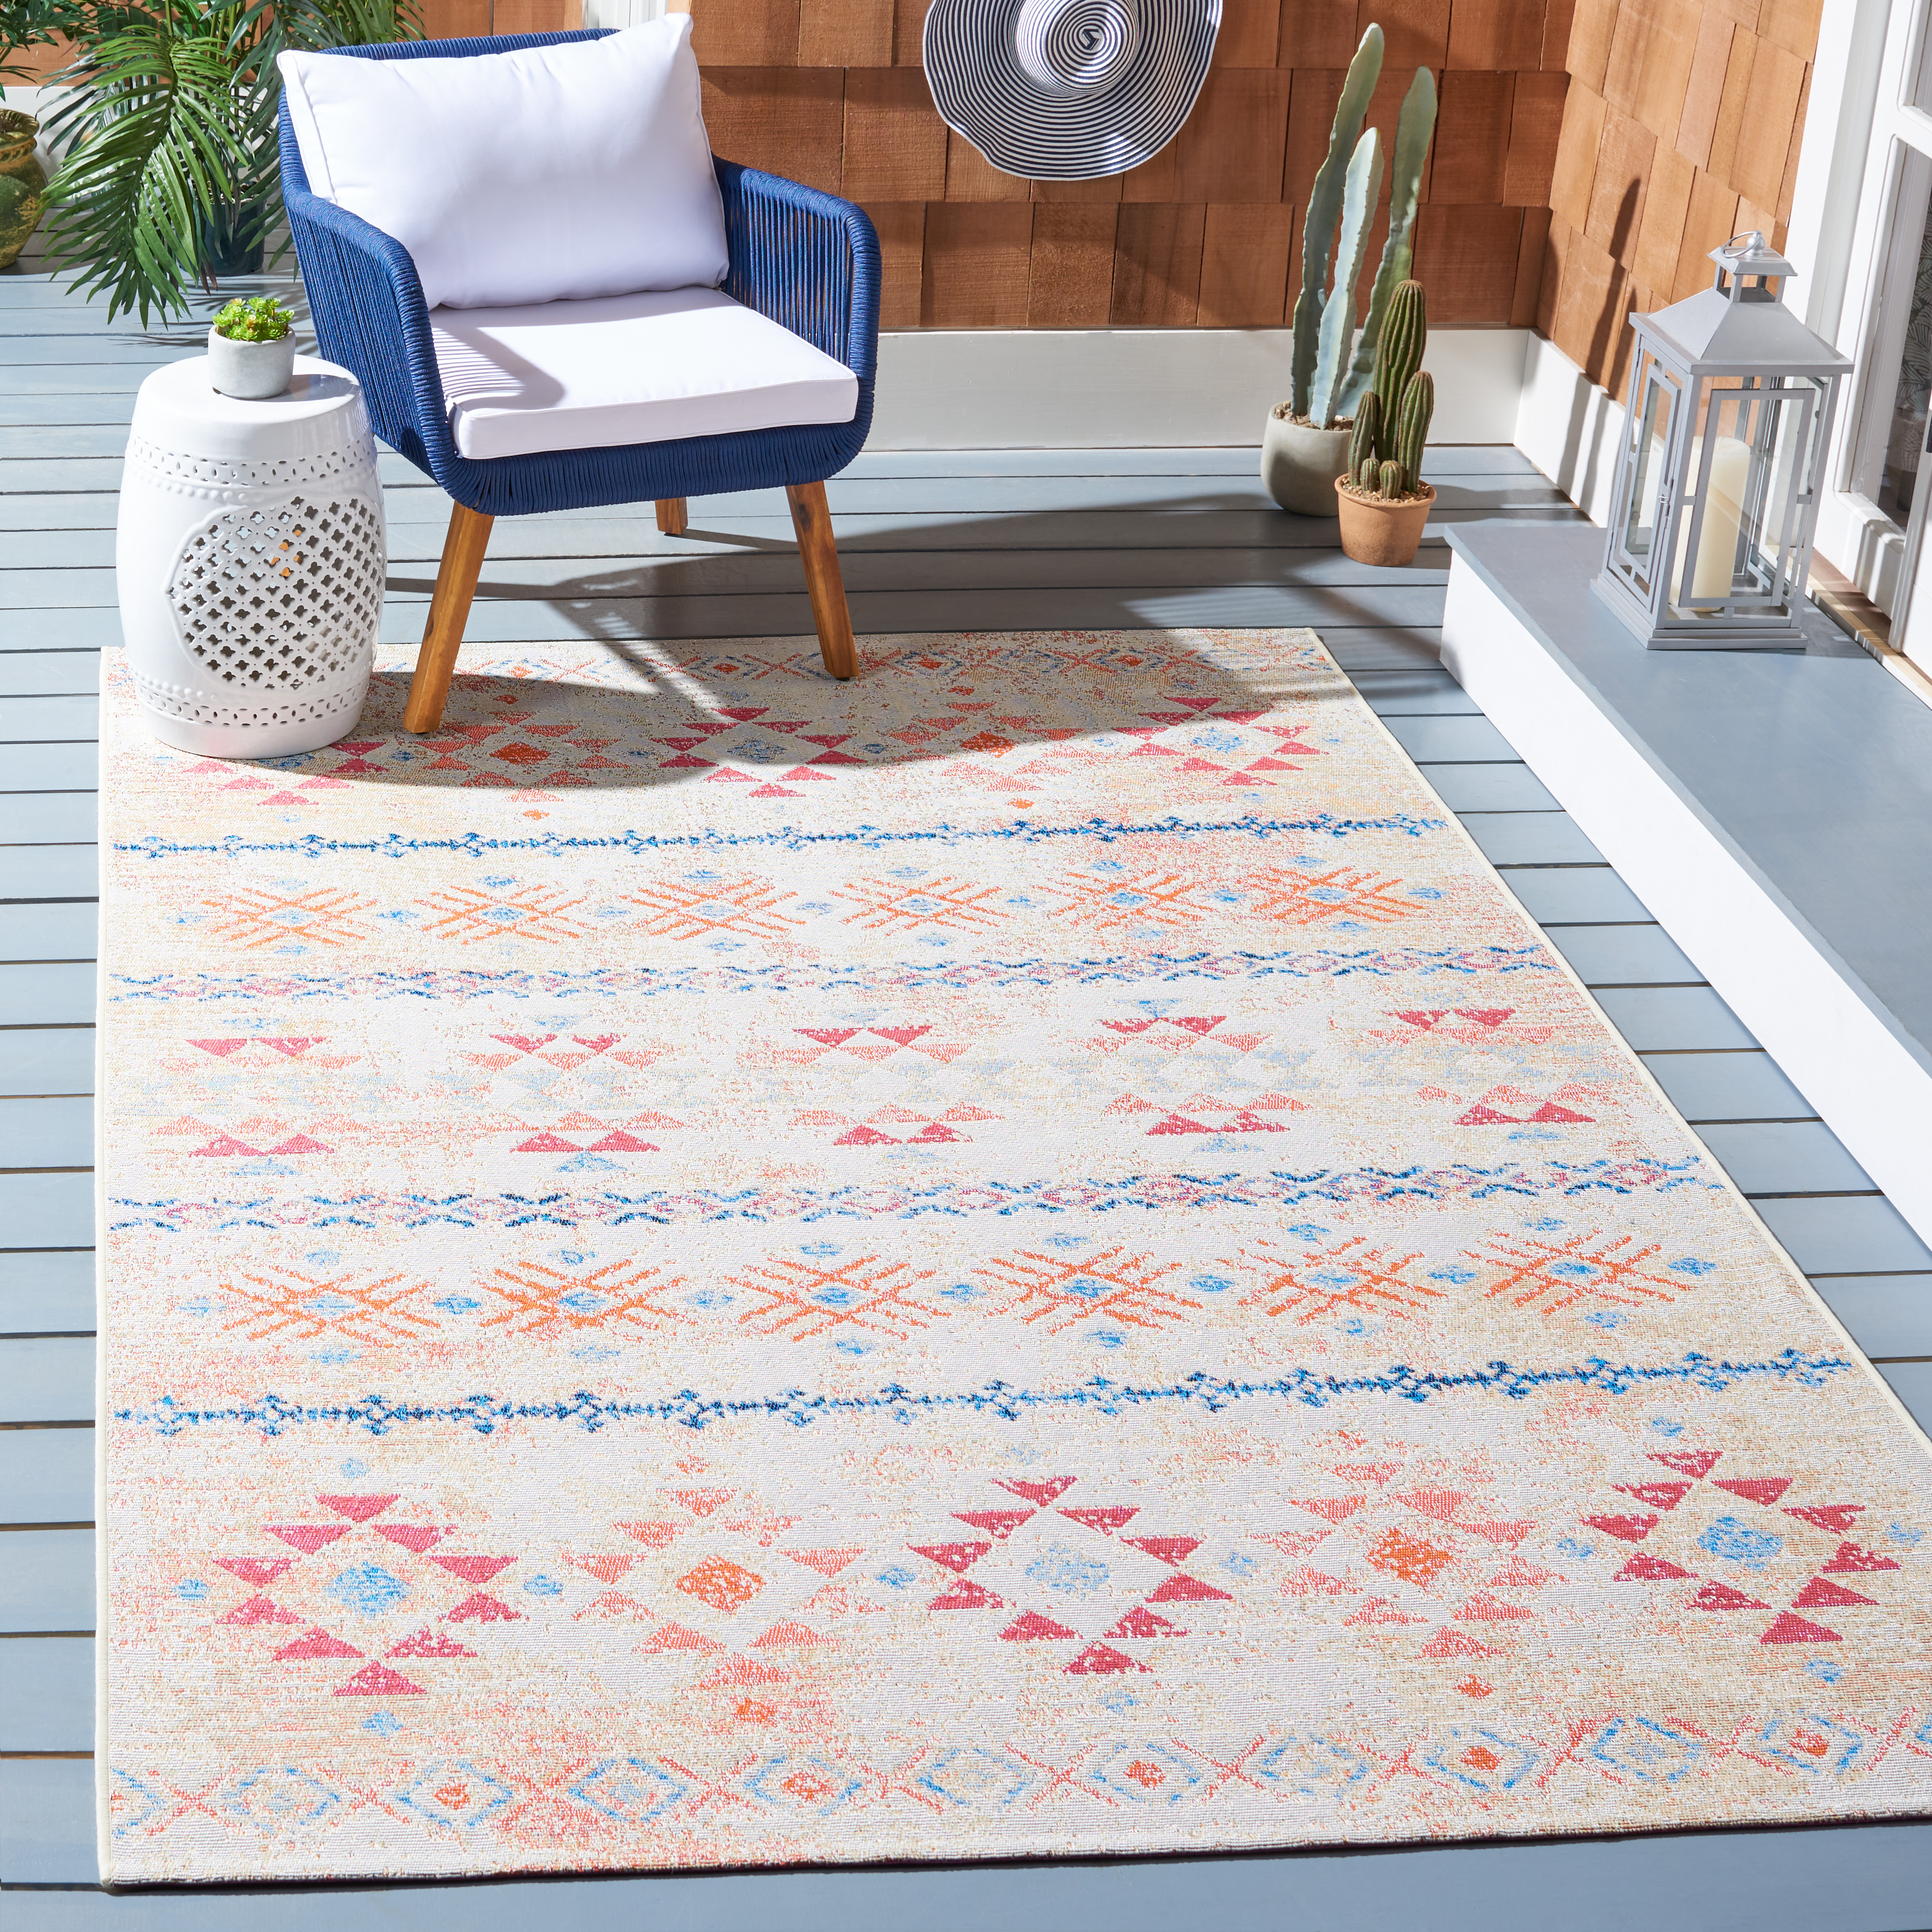 Safavieh Summer Donella Outdoor Boho Distressed Area Rug, Ivory/Red, 4' x 6' - image 1 of 6